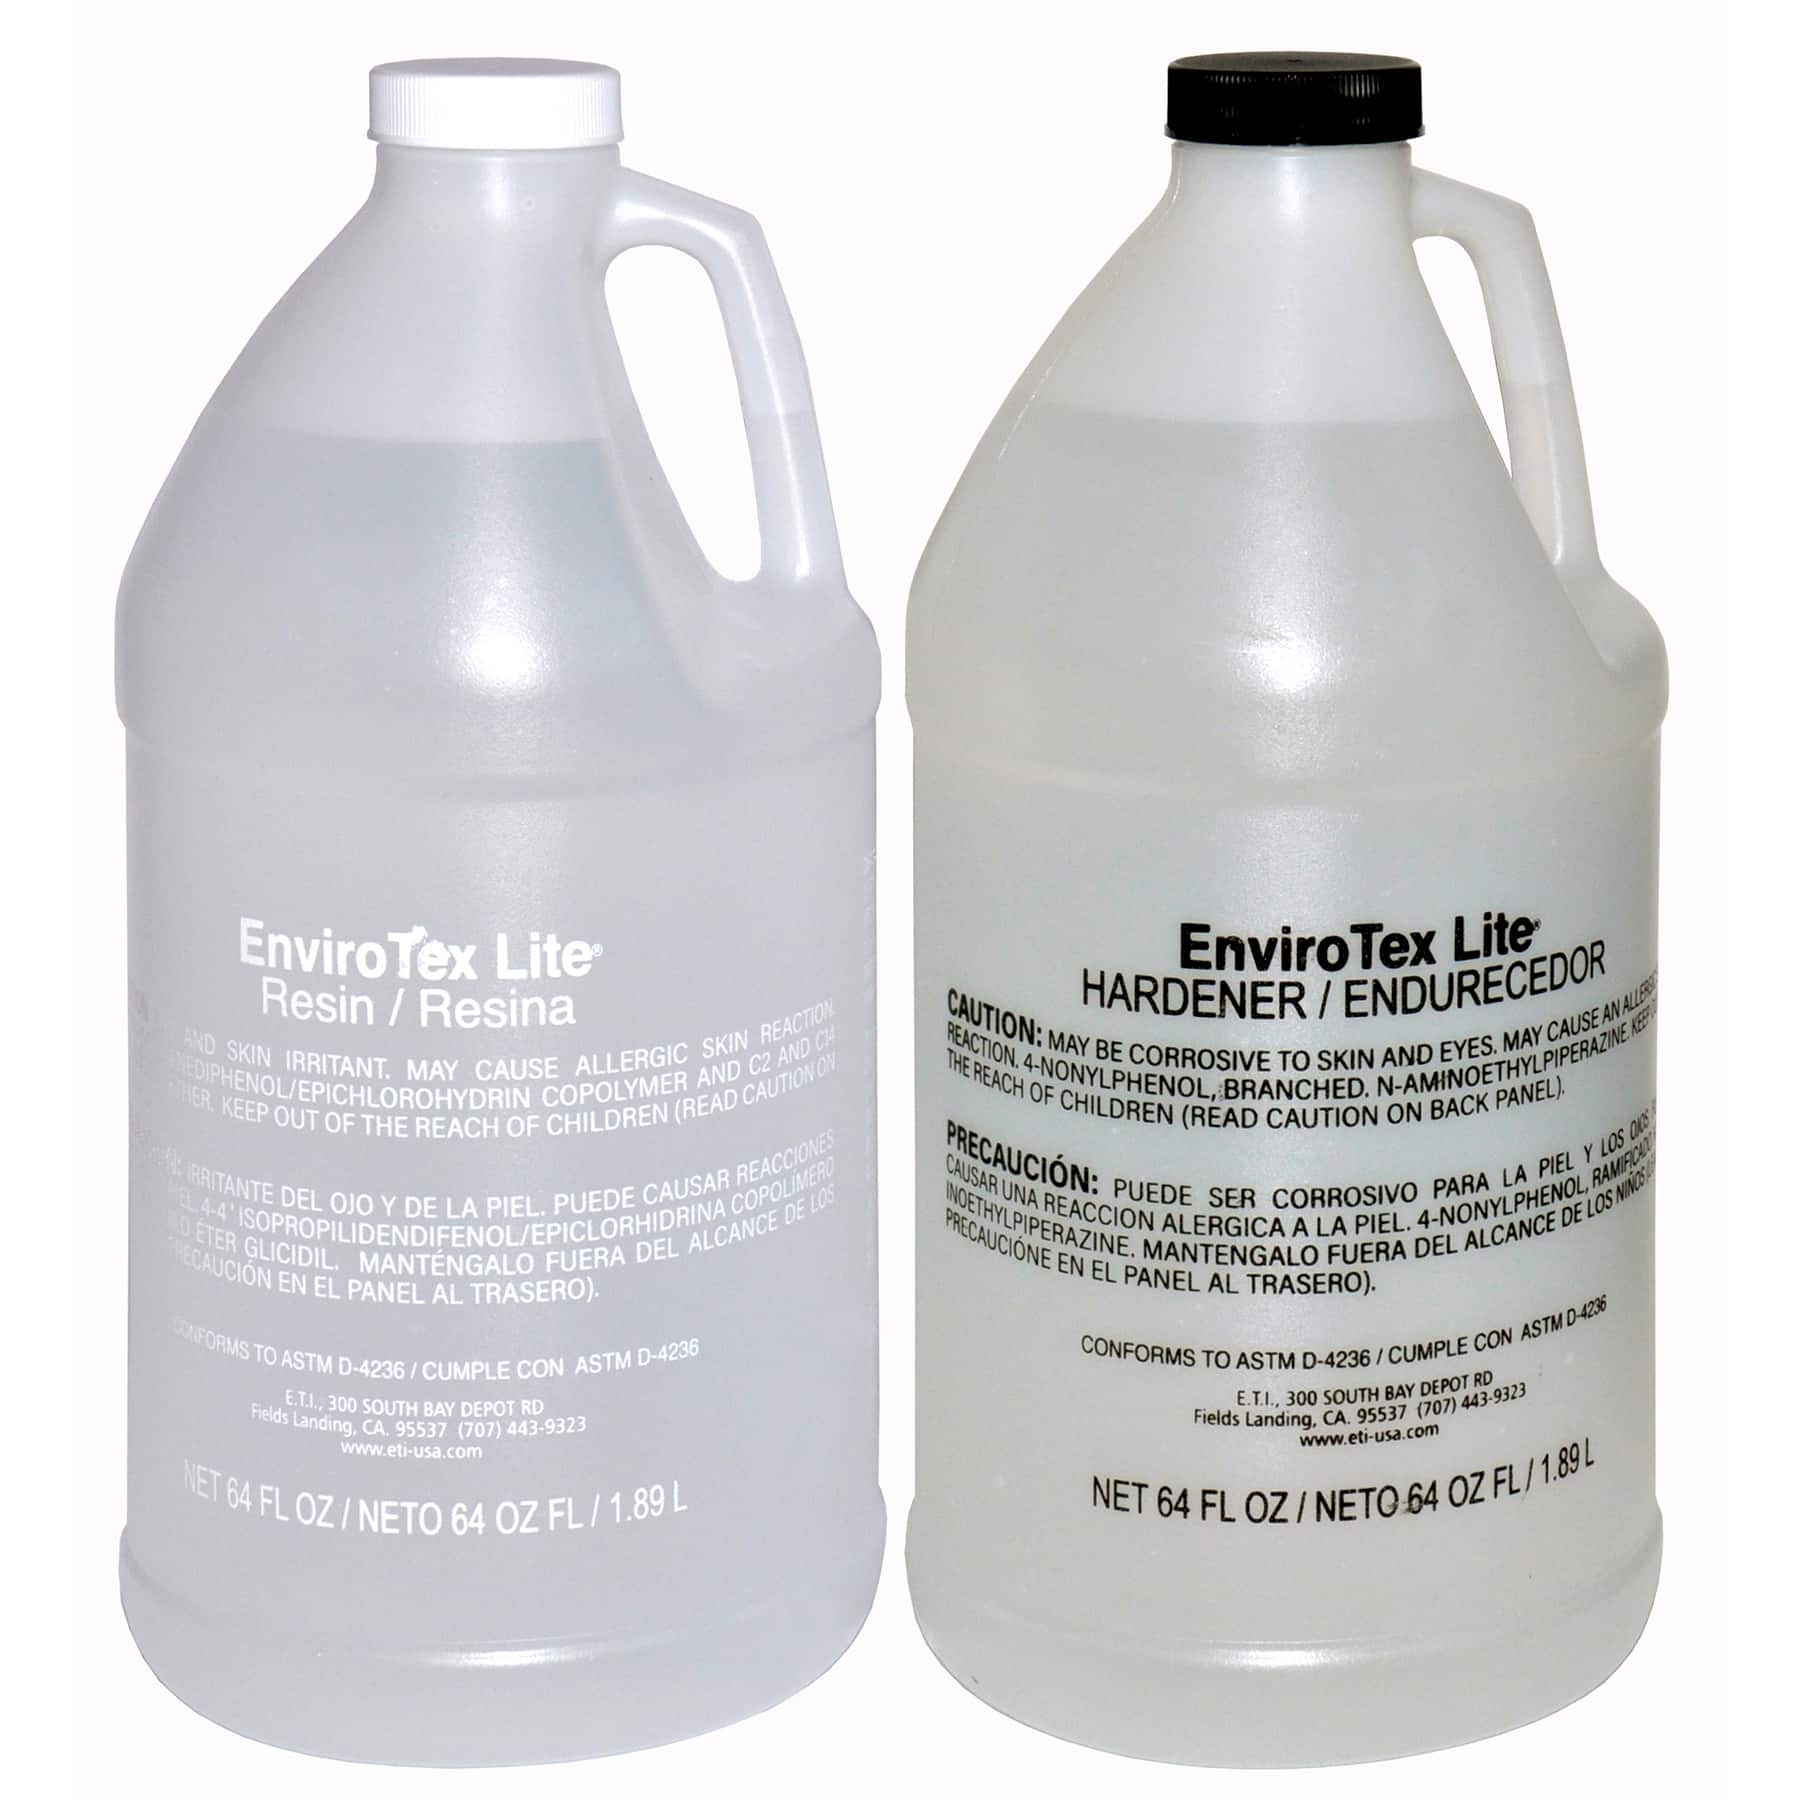 ETI Envirotex Lite Pour-on Product Overview 